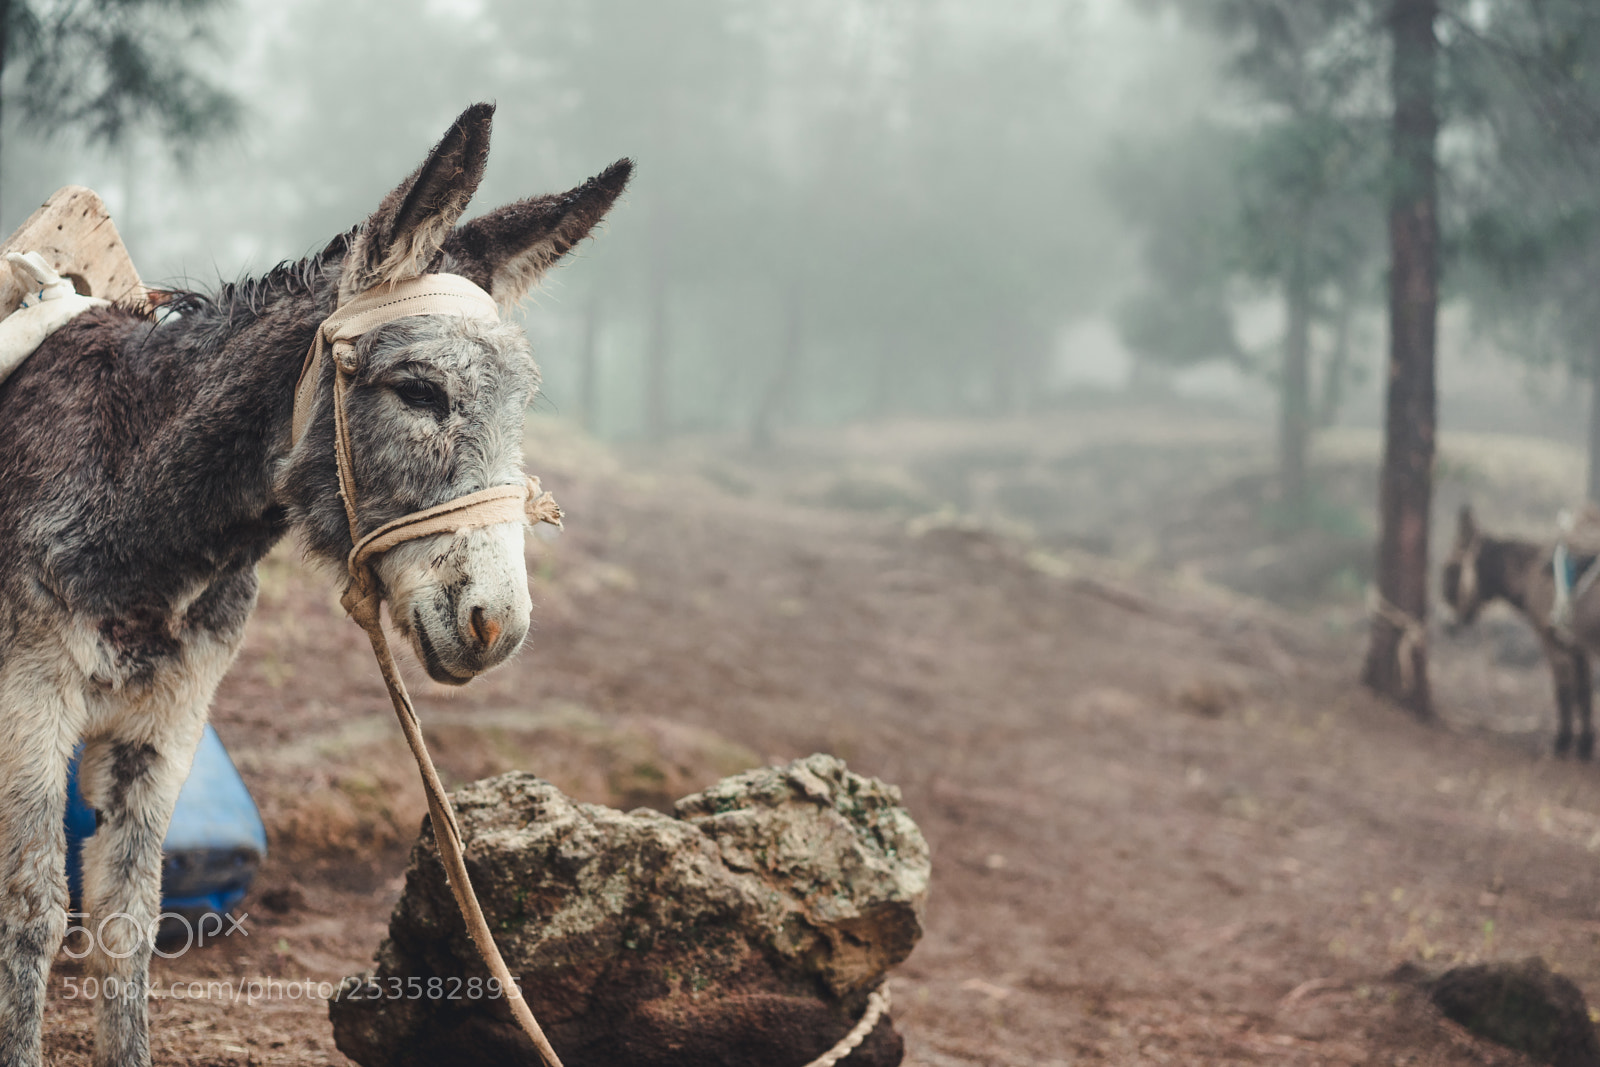 Sony a7 II sample photo. Donkey standing sideways in photography